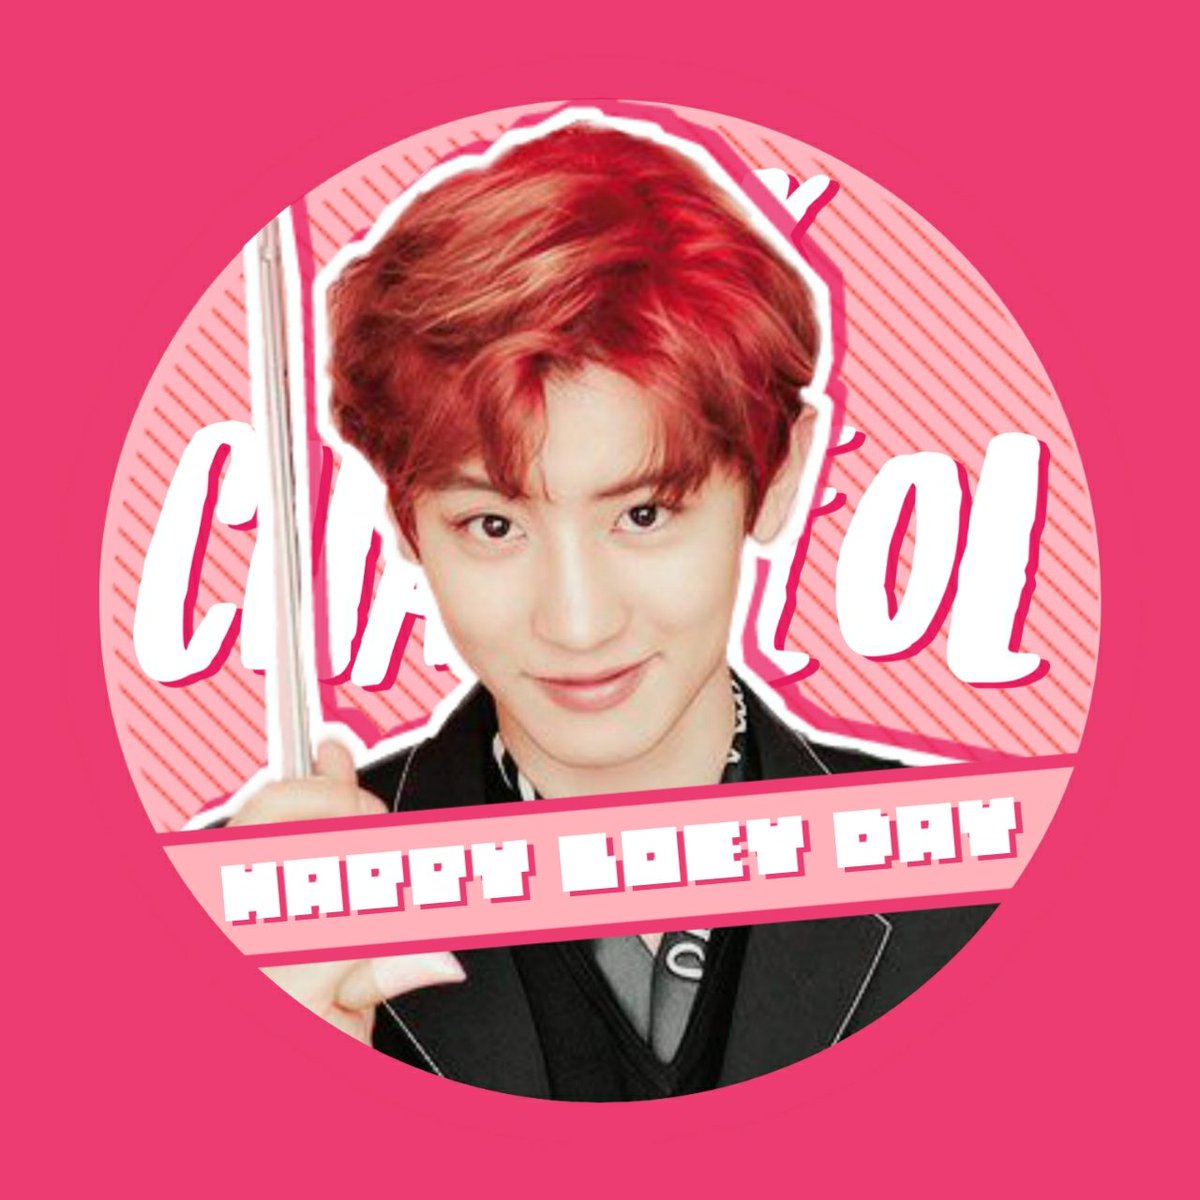 hi y'all, I made some Loey icons & headers. I hope that you'll appreciate them T-T[ #HAPPYLOEYDAY in advanced] @weareoneEXO